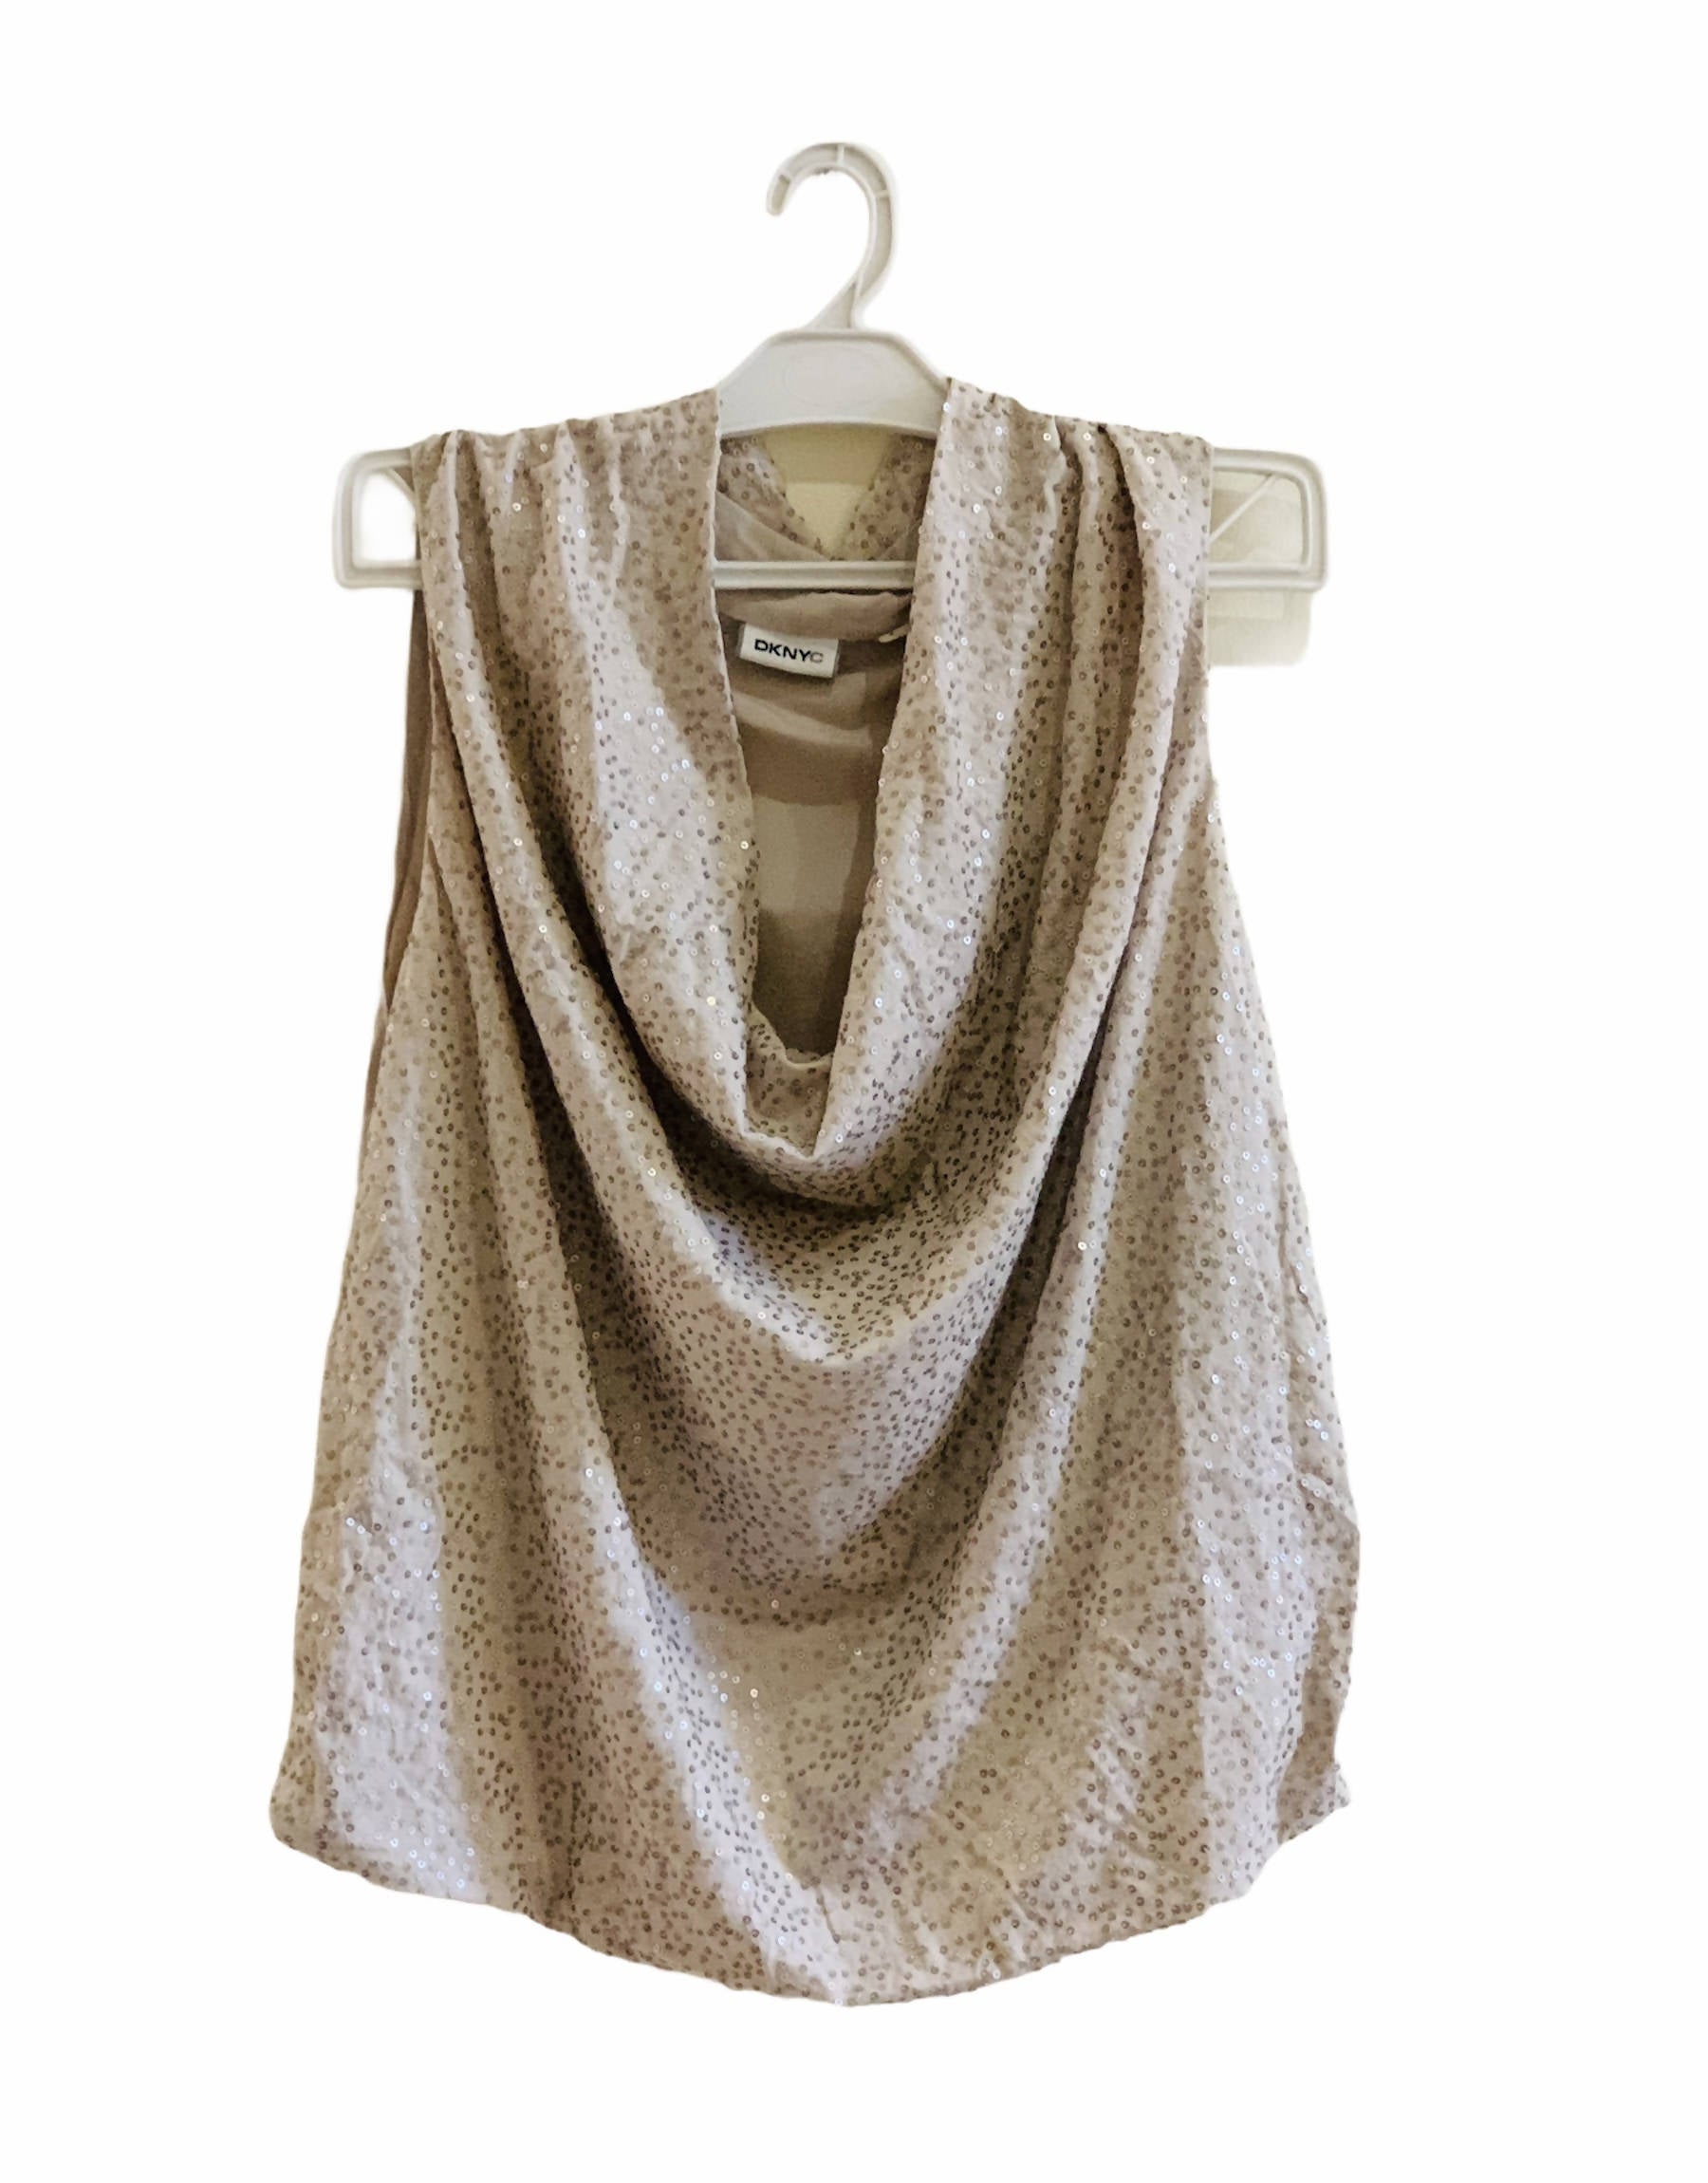 DKNY | WOMEN TOP SEQUINED SLEEVELESS SHIRT | SIZE M | WORN ONCE